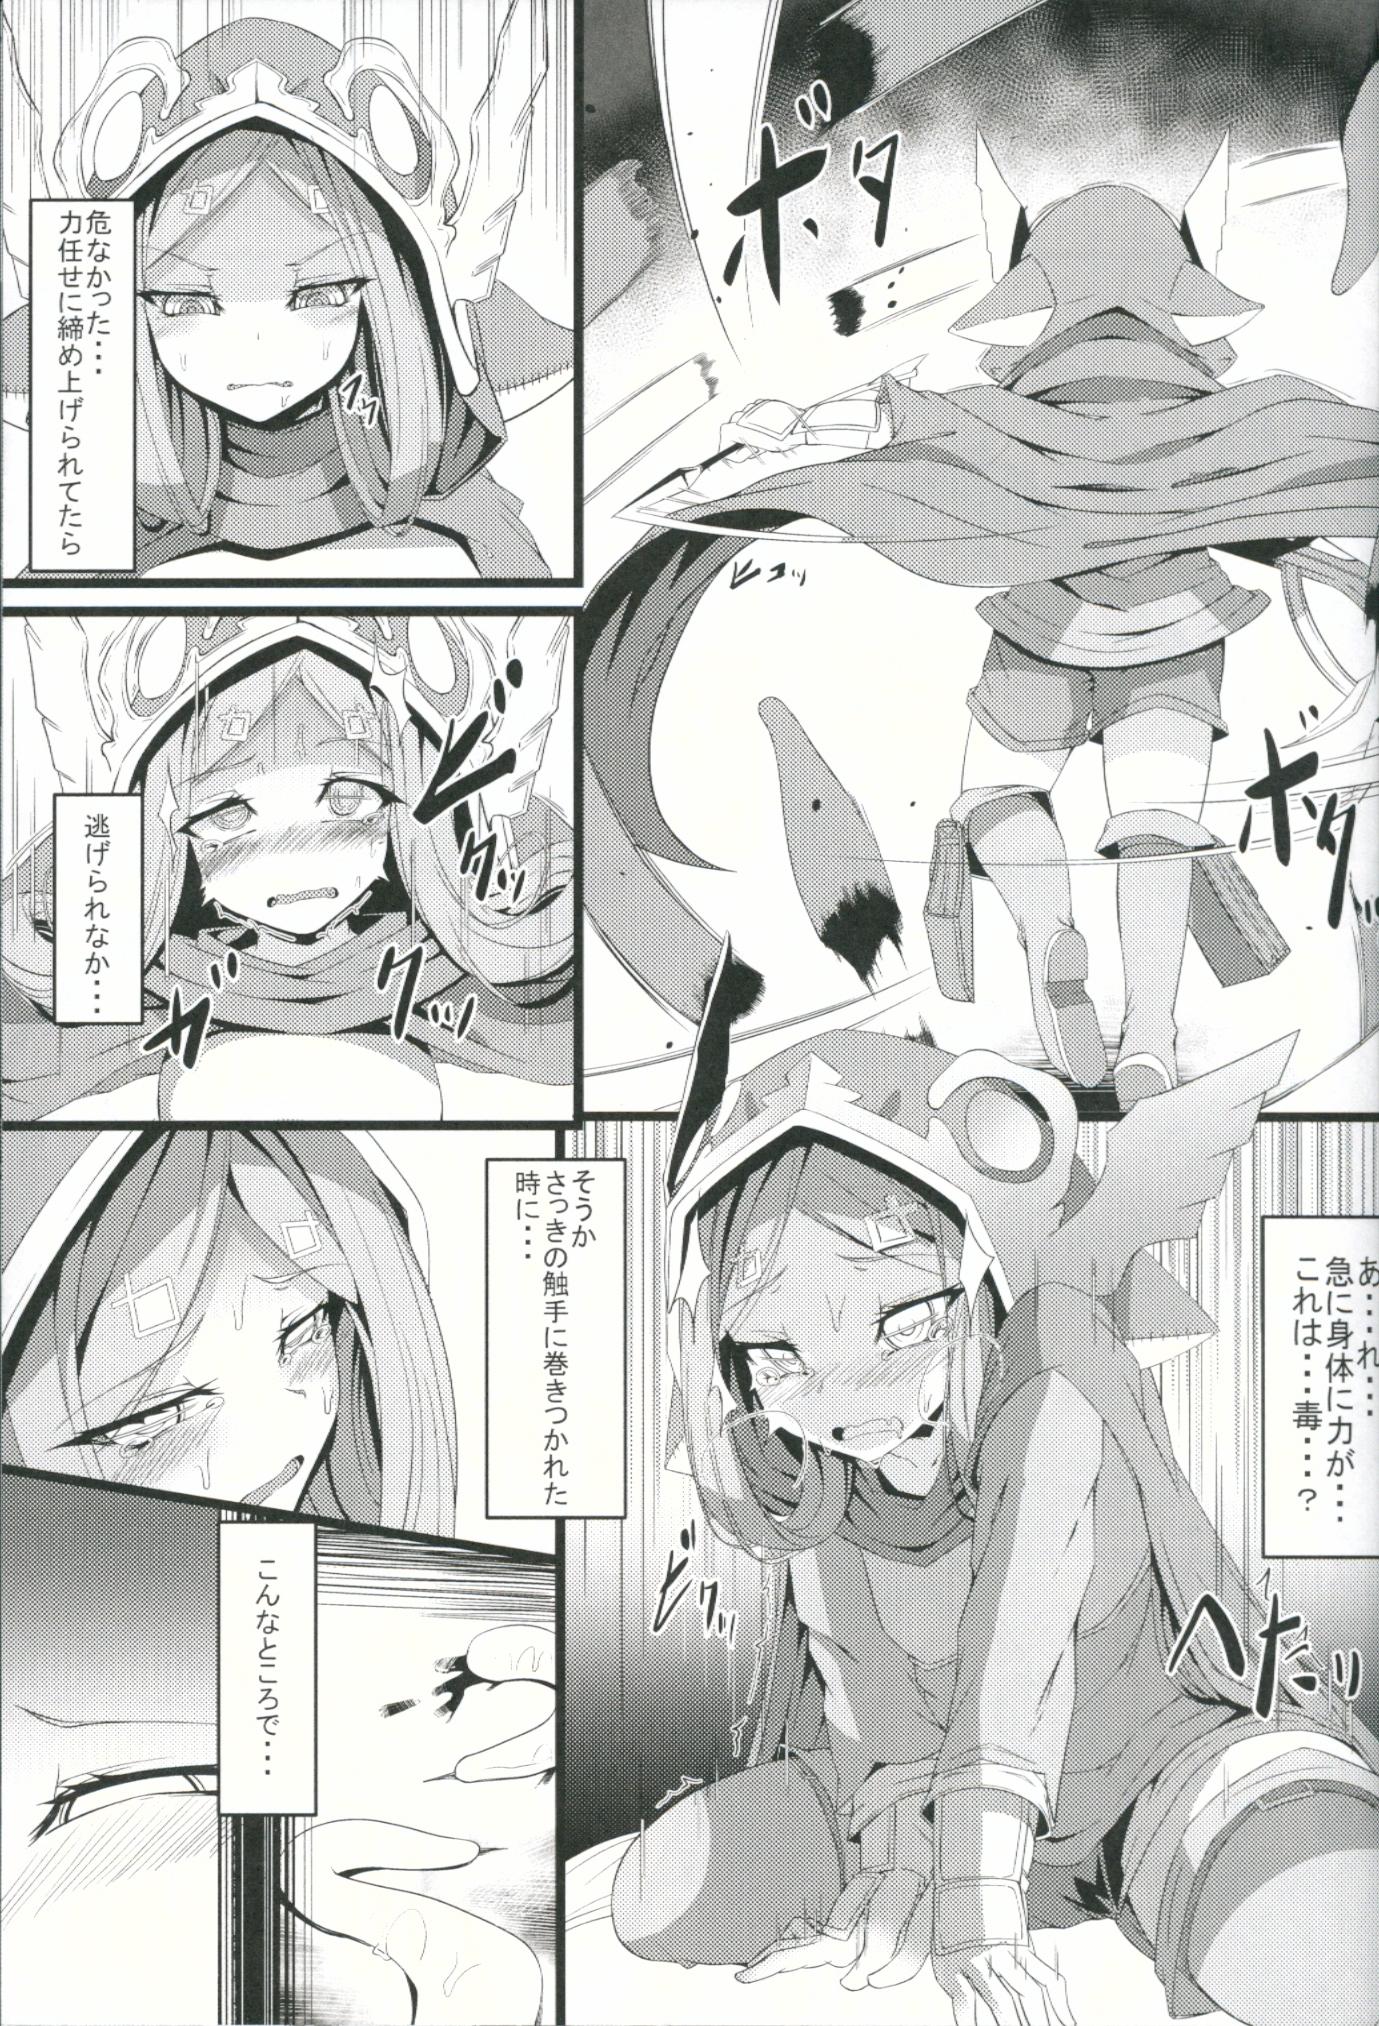 Sex Pussy M.P. Vol. 6 - Granblue fantasy Cosplay - Page 6